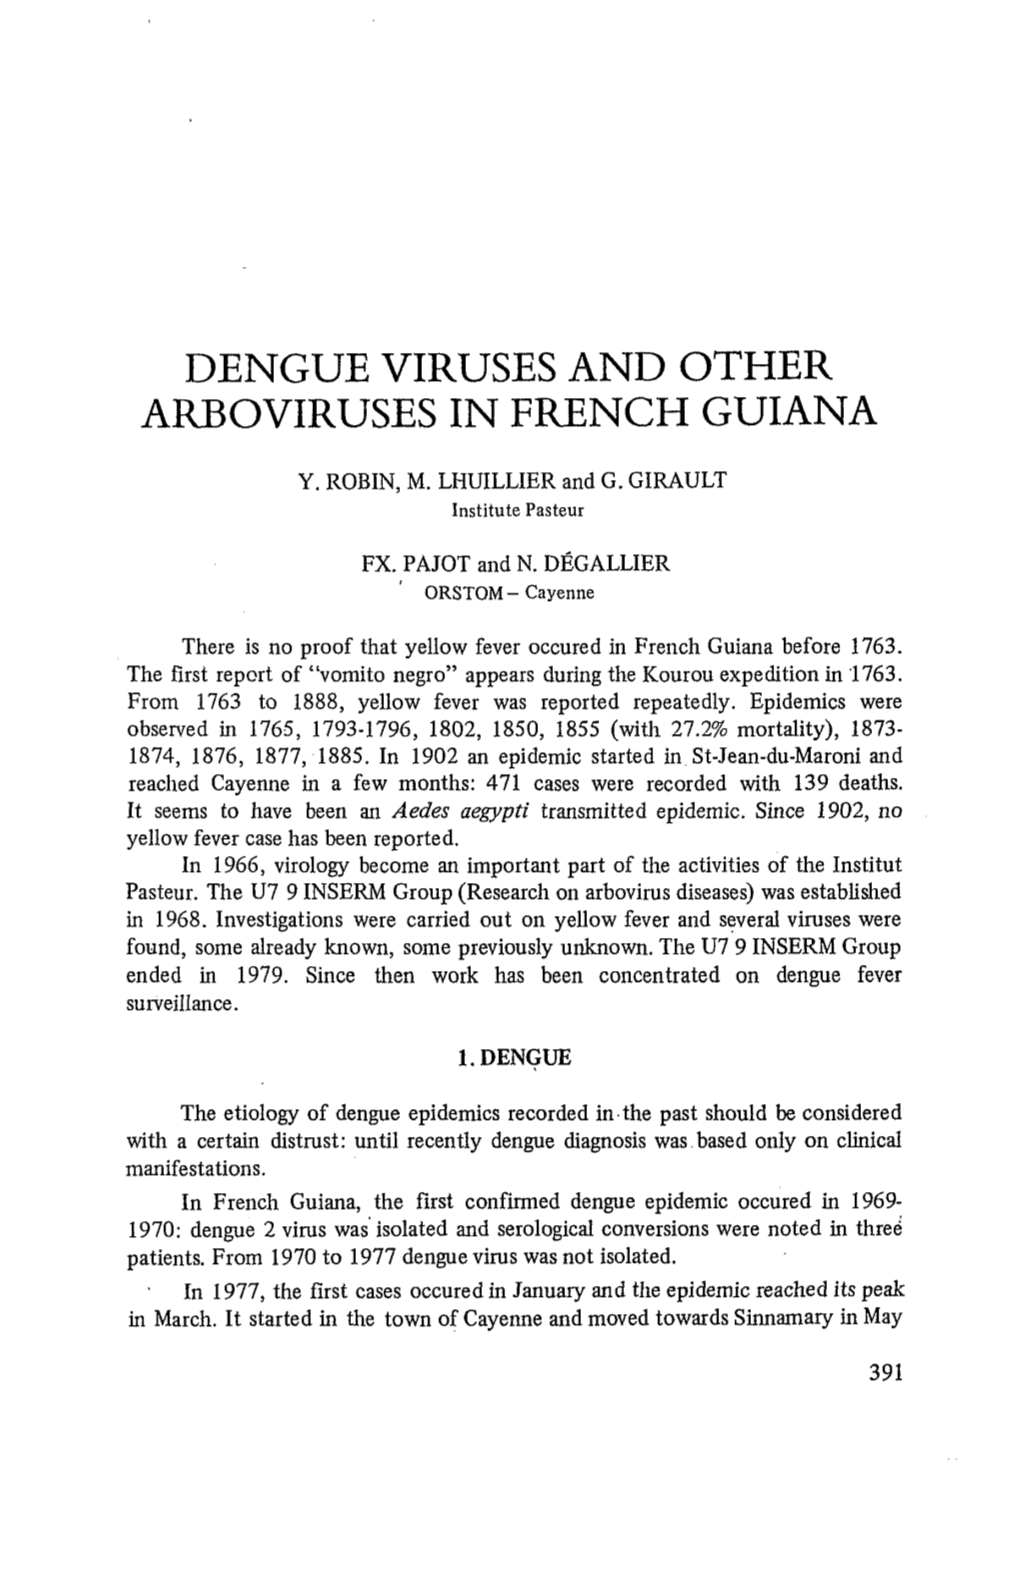 Dengue Viruses and Other Arboviruses in French Guiana \I, F